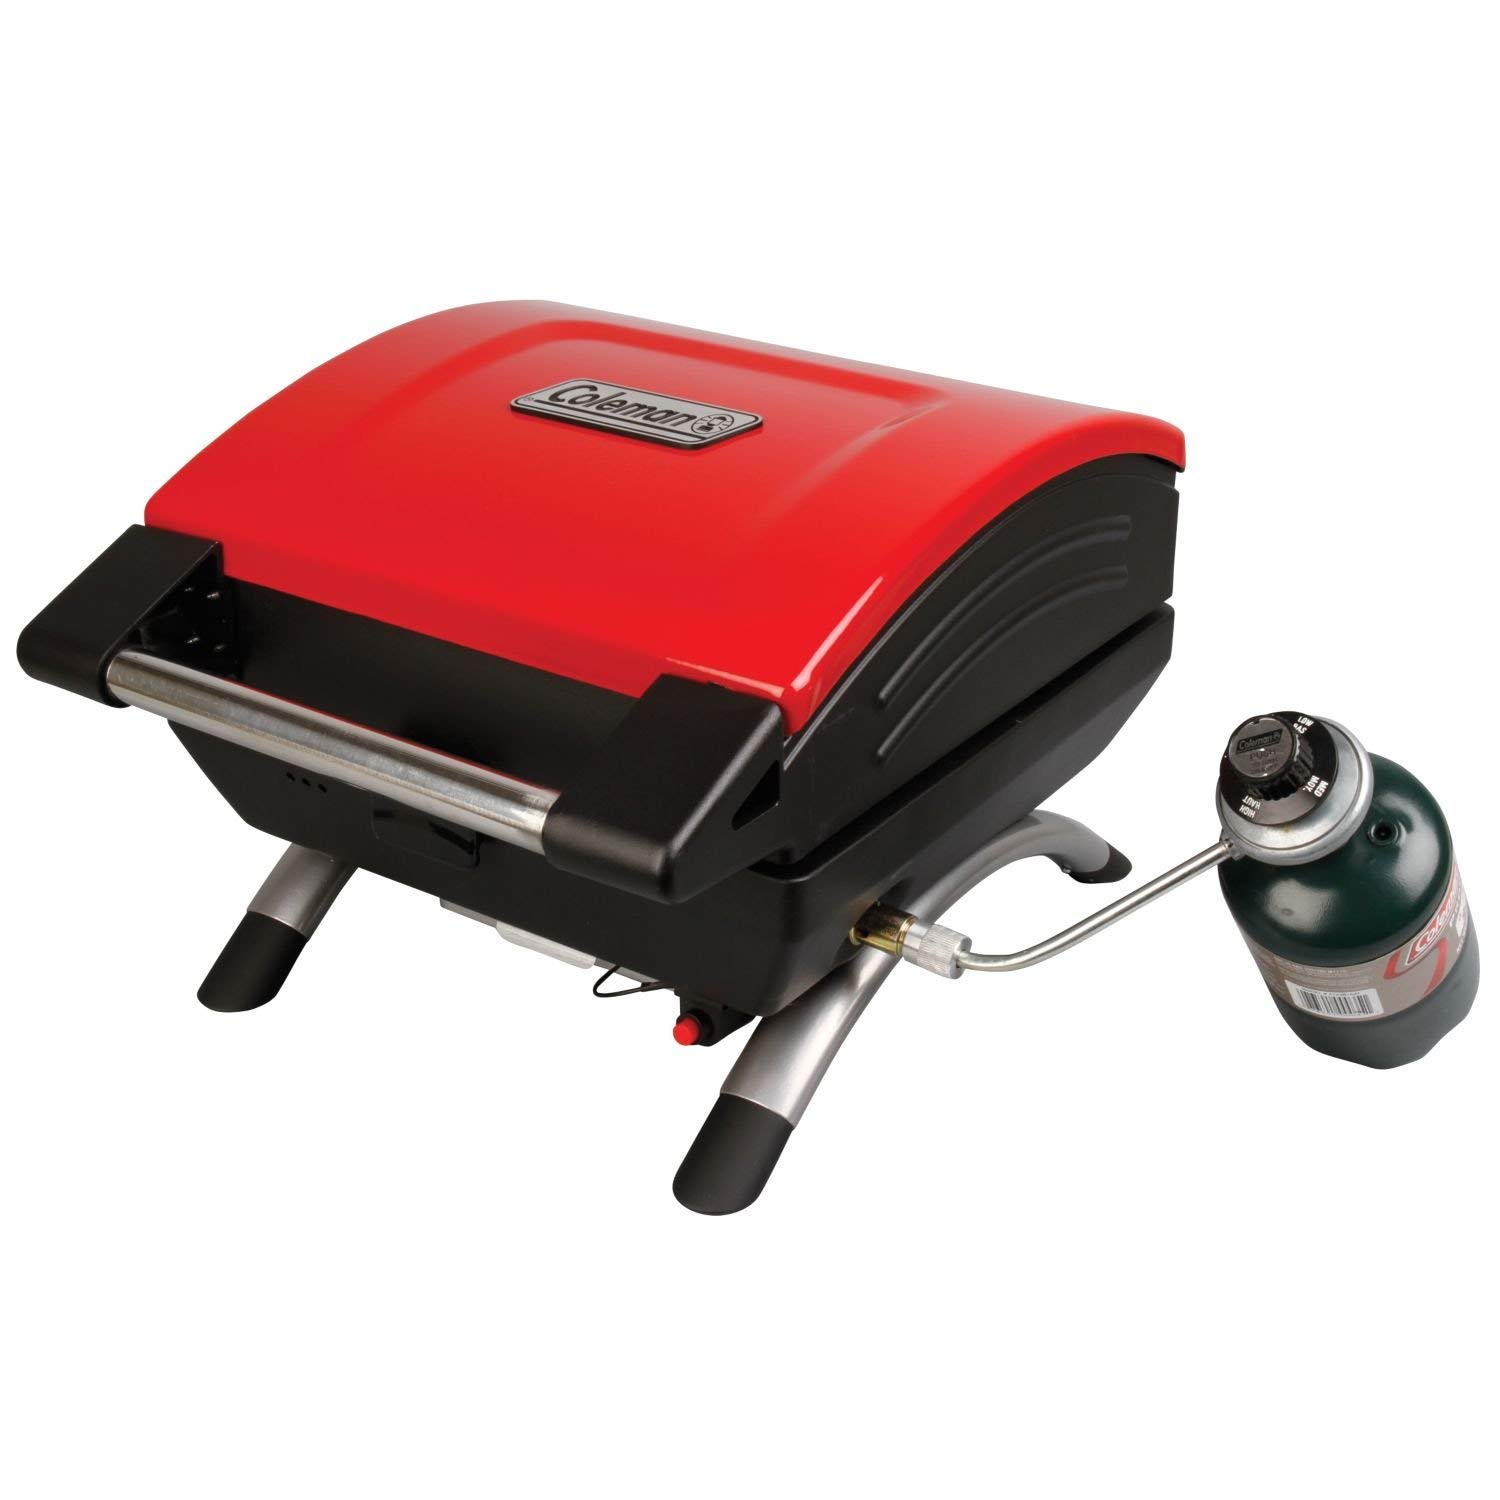 Best Cheap Gas Grill - Buy Electric, Charcoal and Propane Grills At Best Prices